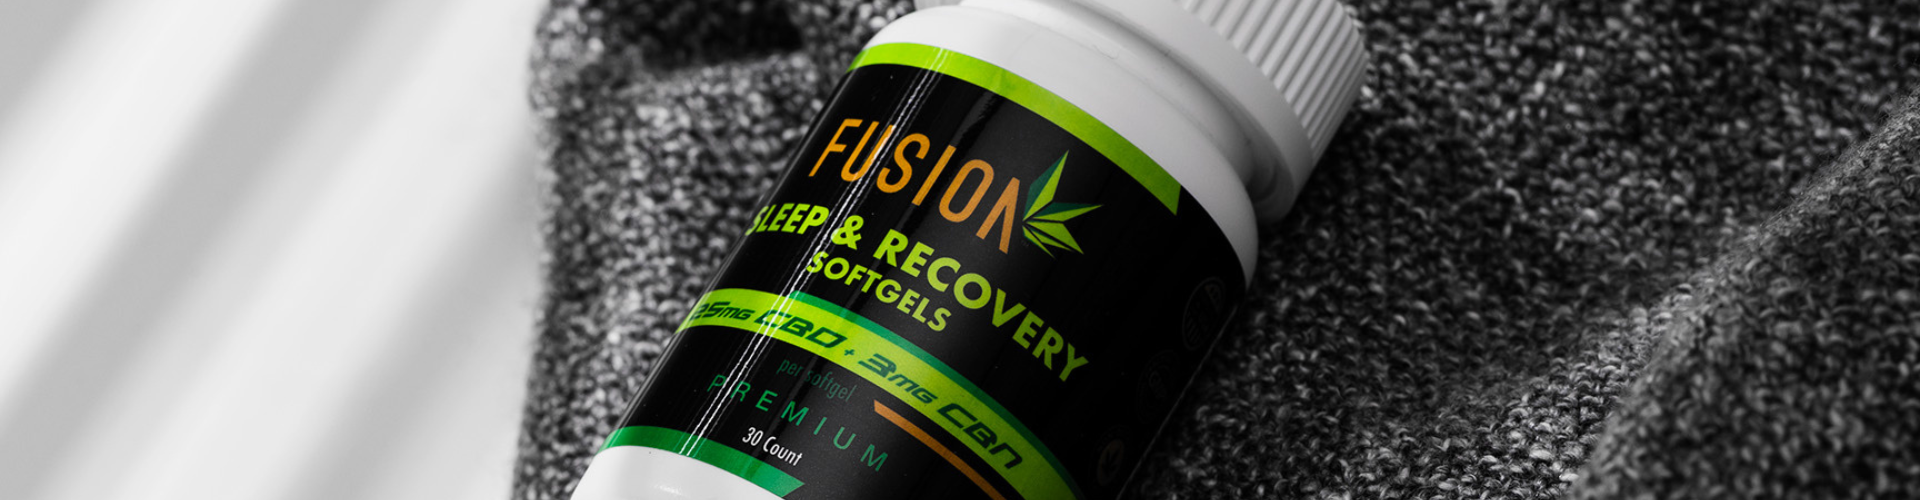 Fusion CBD Products sleep and recovery softgels